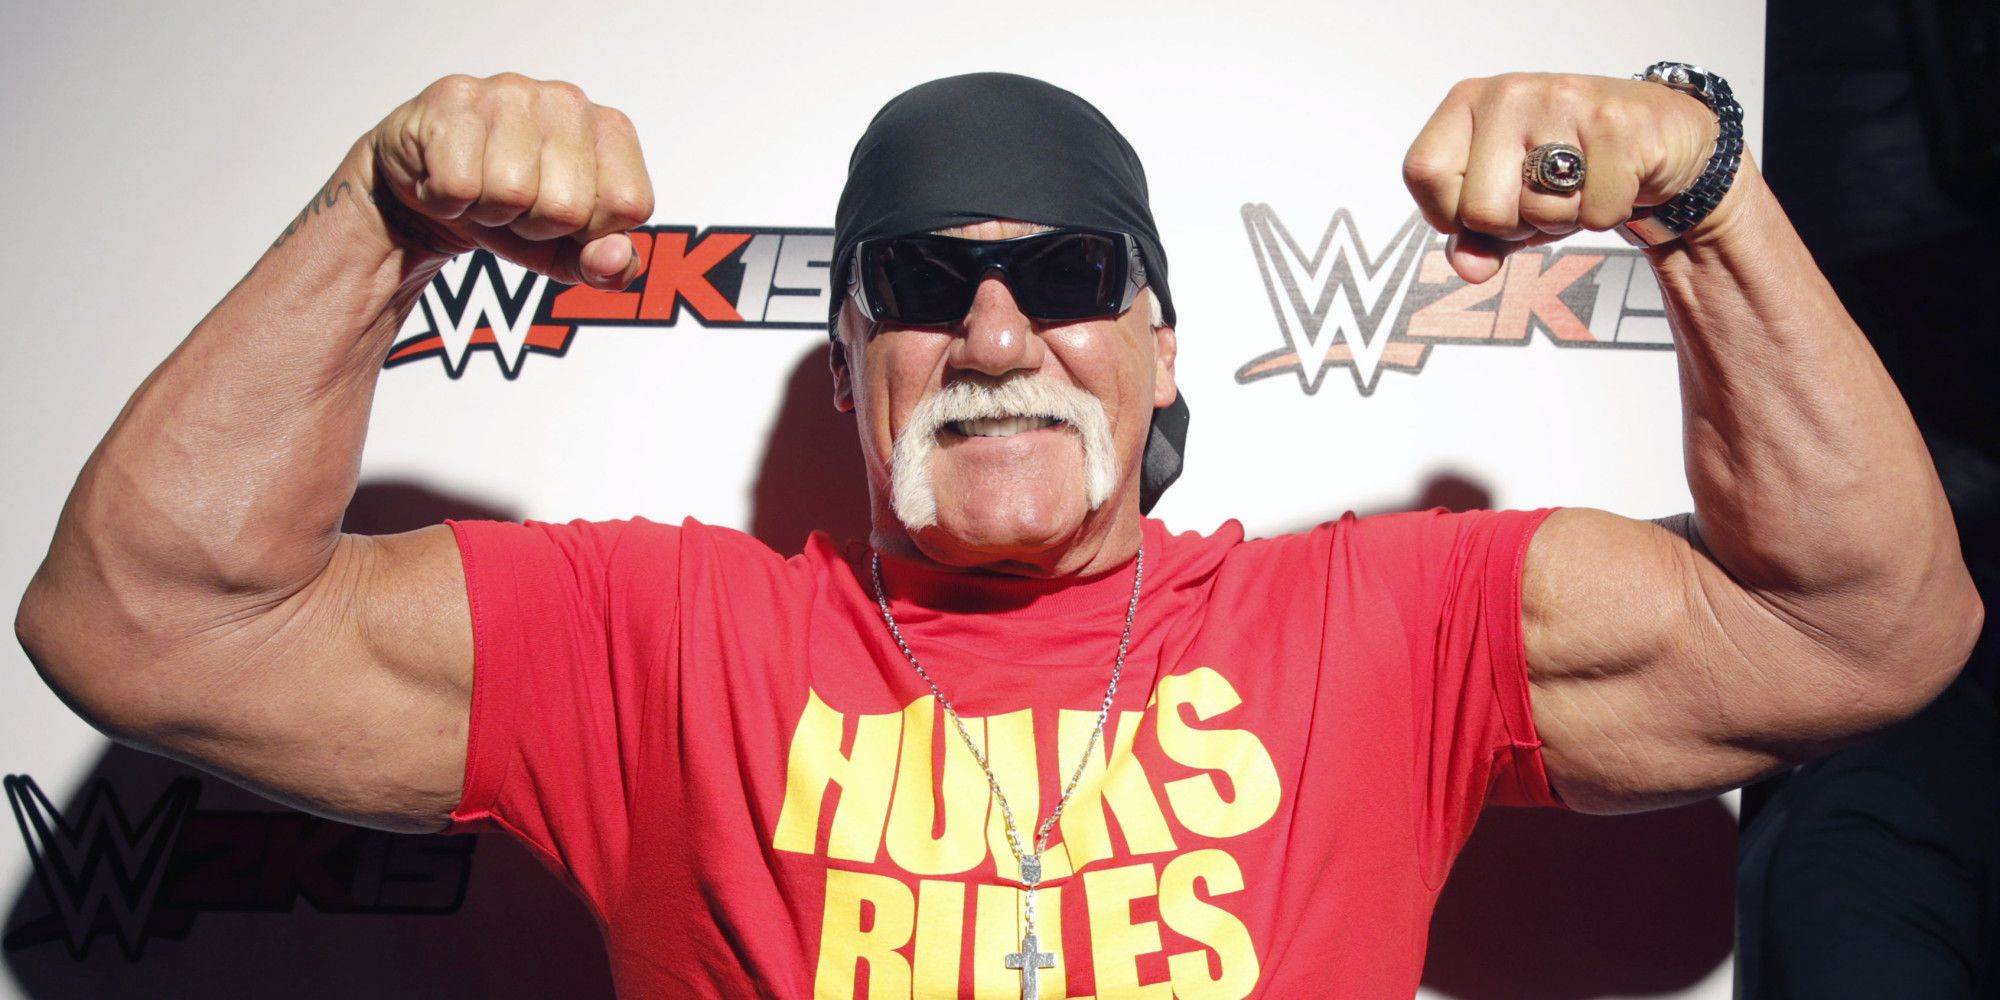 15 Former WWE Superstars Who Would Have Never Passed The Wellness Test